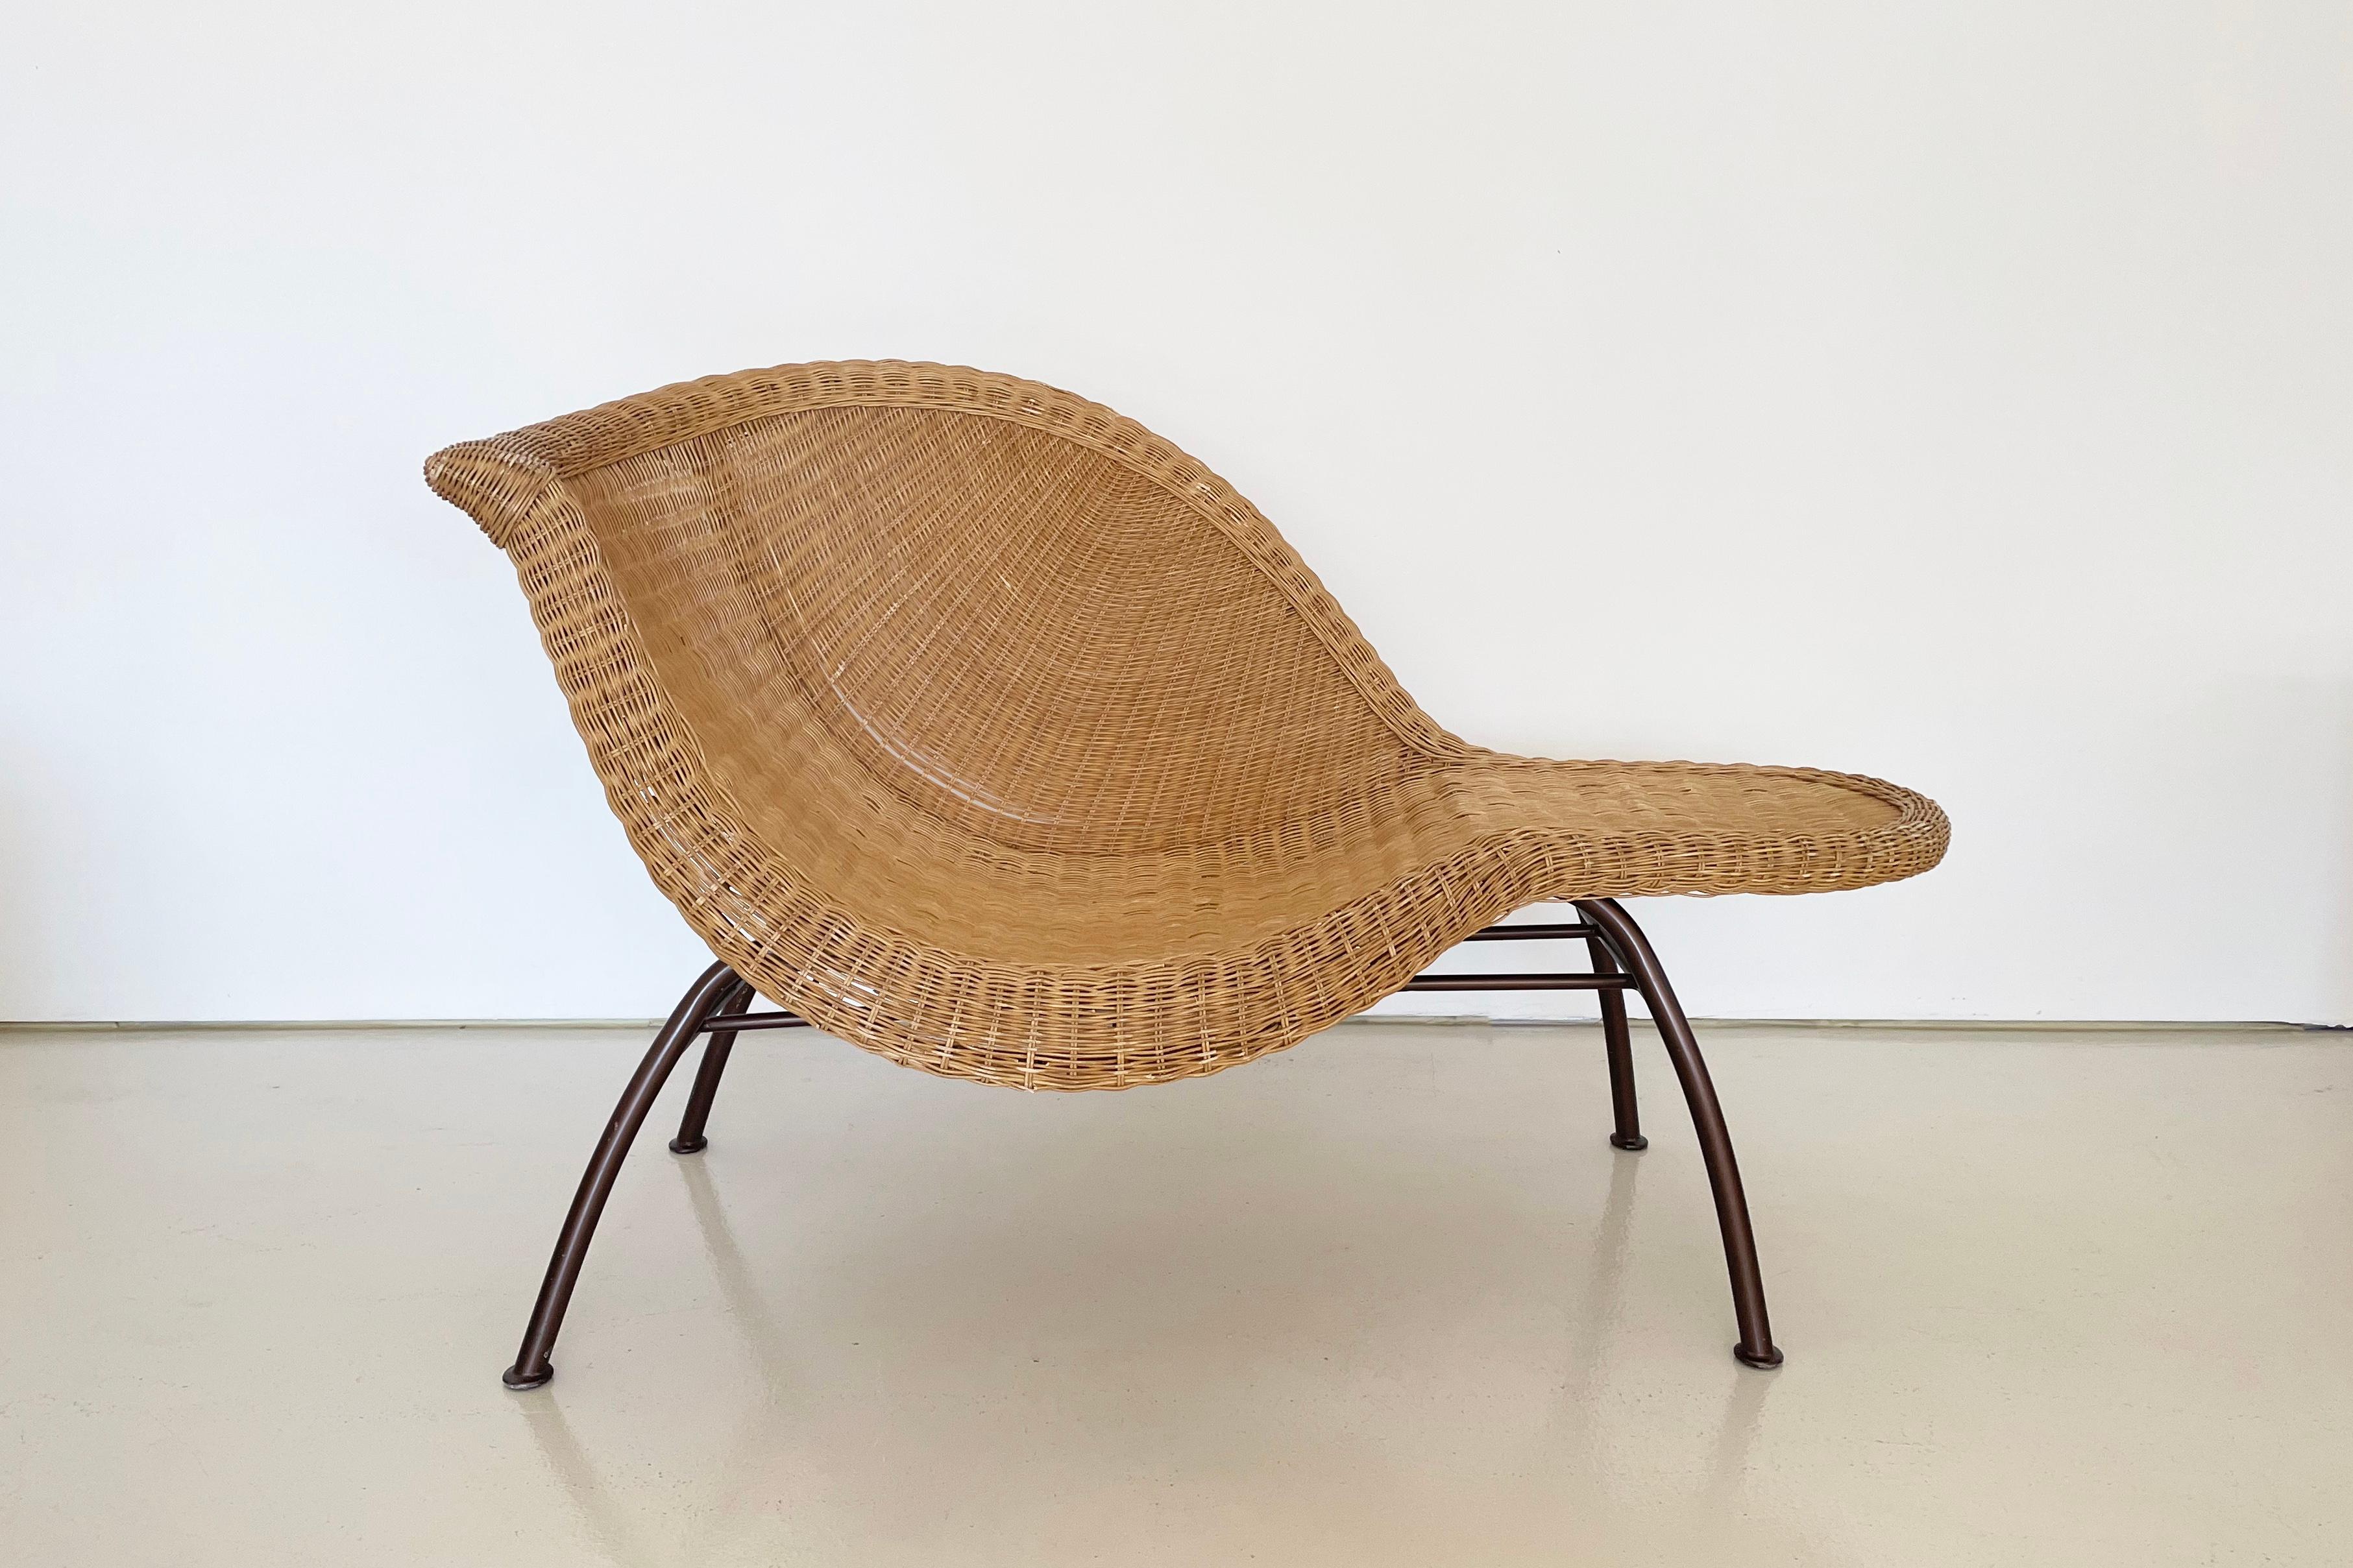 Believed to be 1970s.

The asymmetrical, natural woven, wicker seat allows for a lounging position or use as a seat with a table-like surface to on side. 

There is some broken wicker in various places. All wear has been thoroughly documented in the